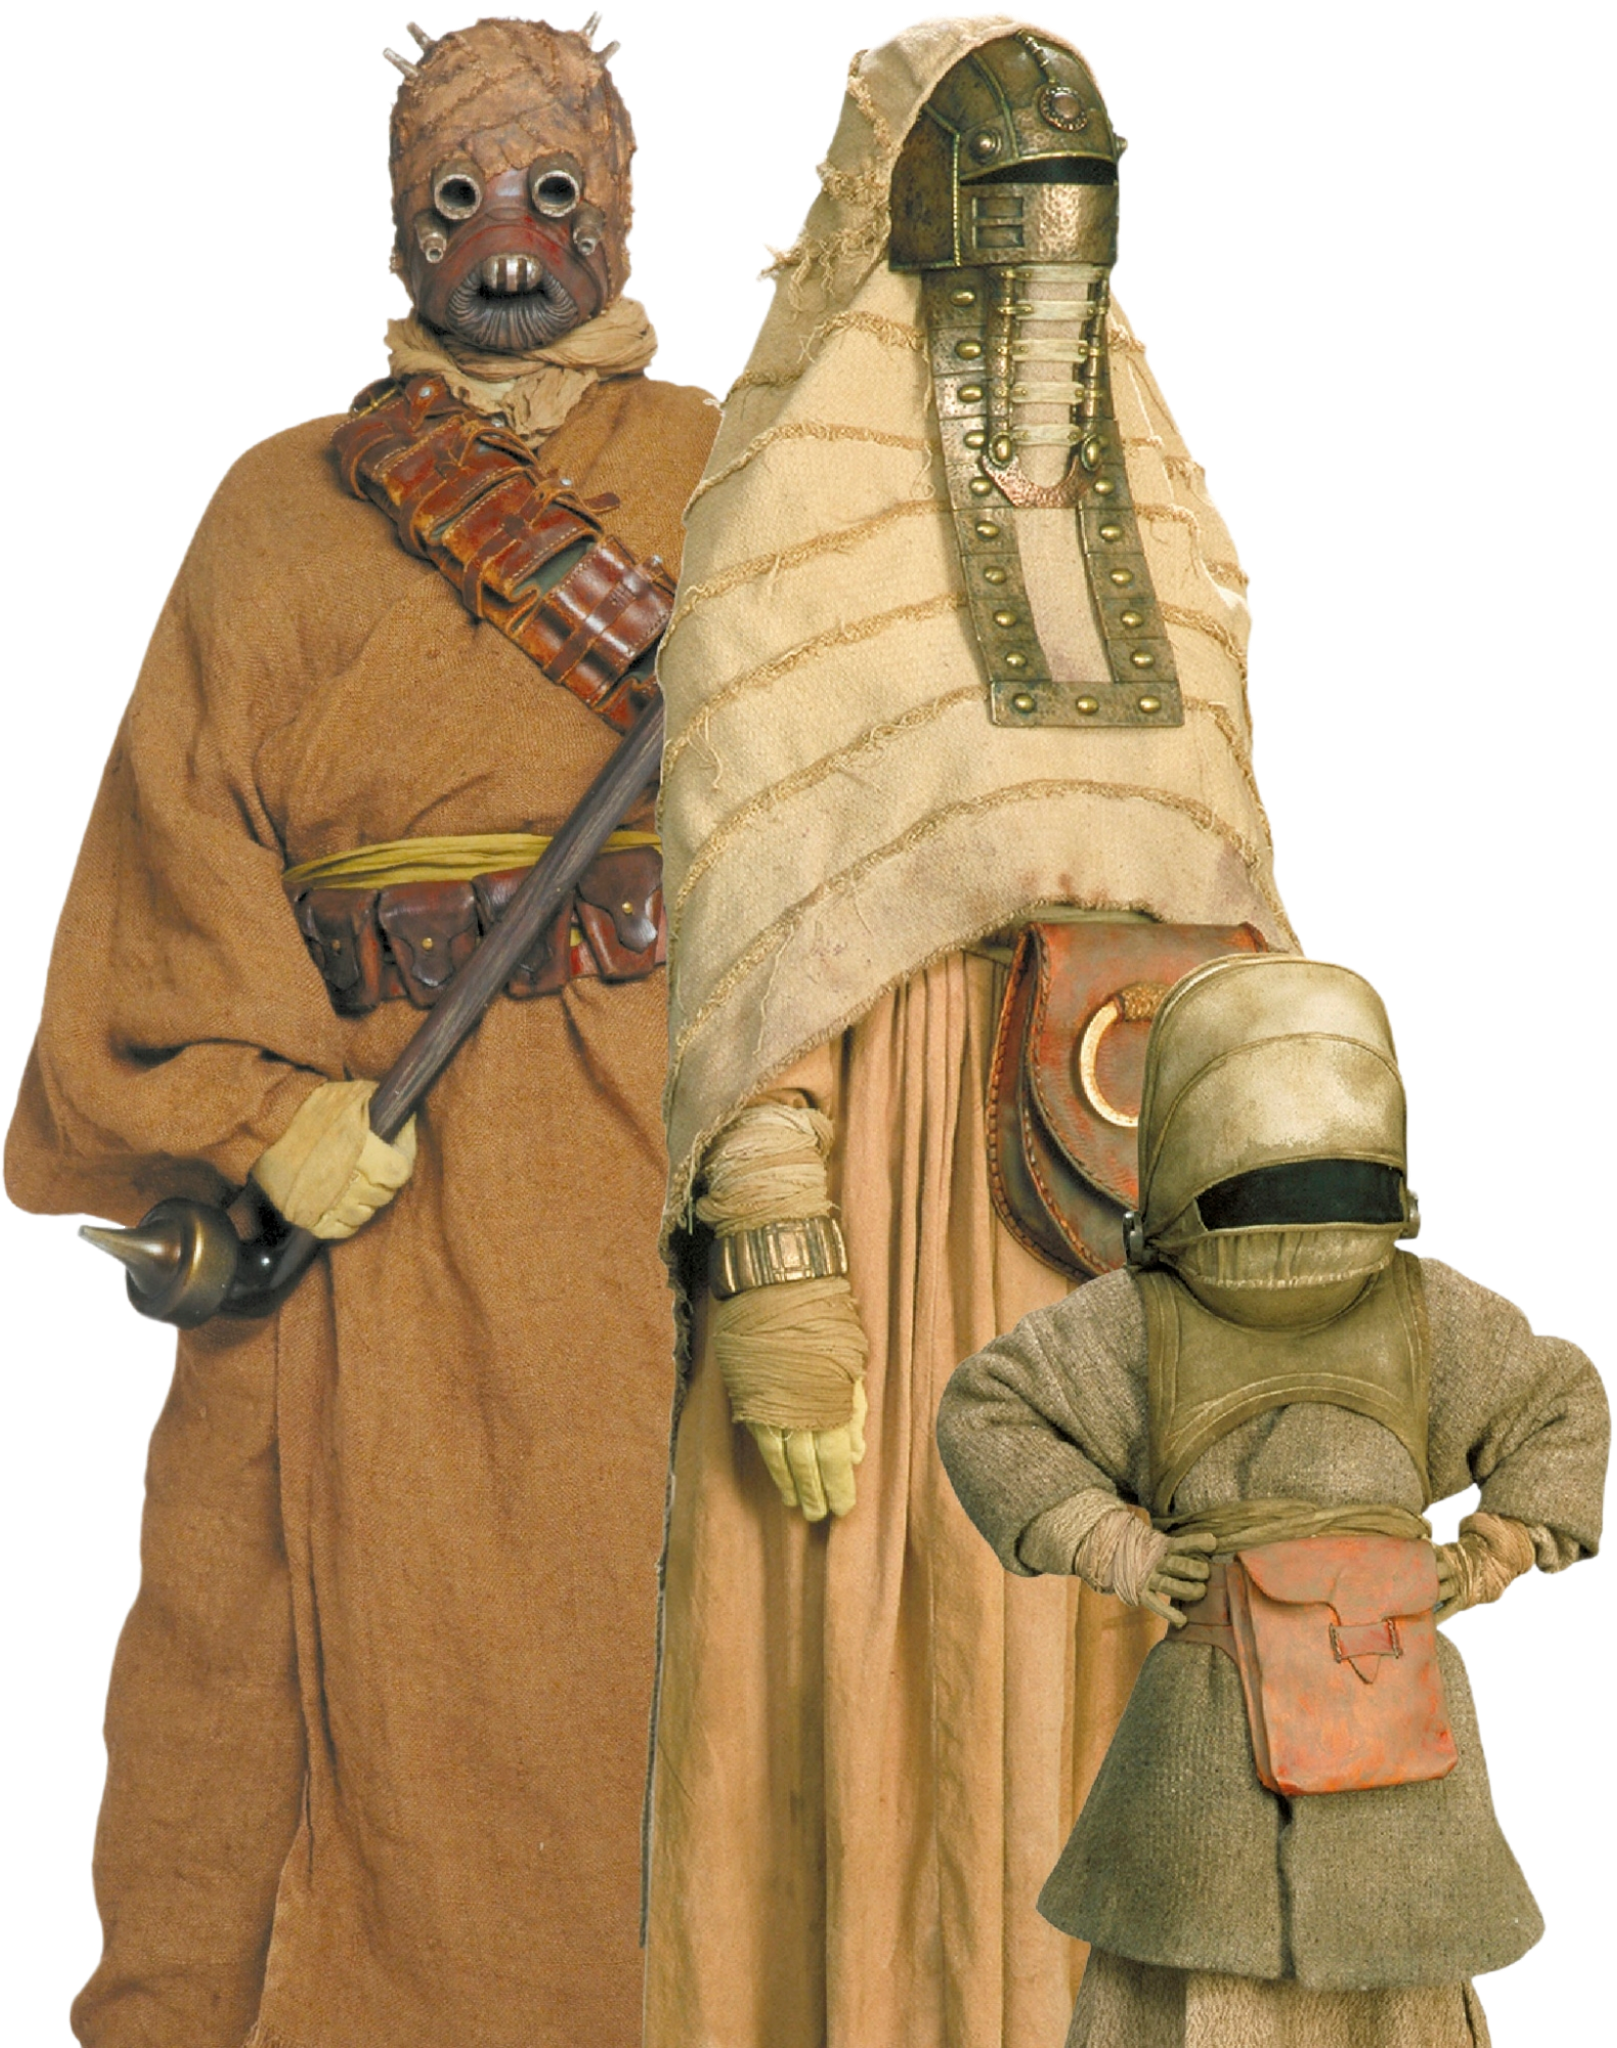 Who are the Tusken Raiders in the Star Wars series?